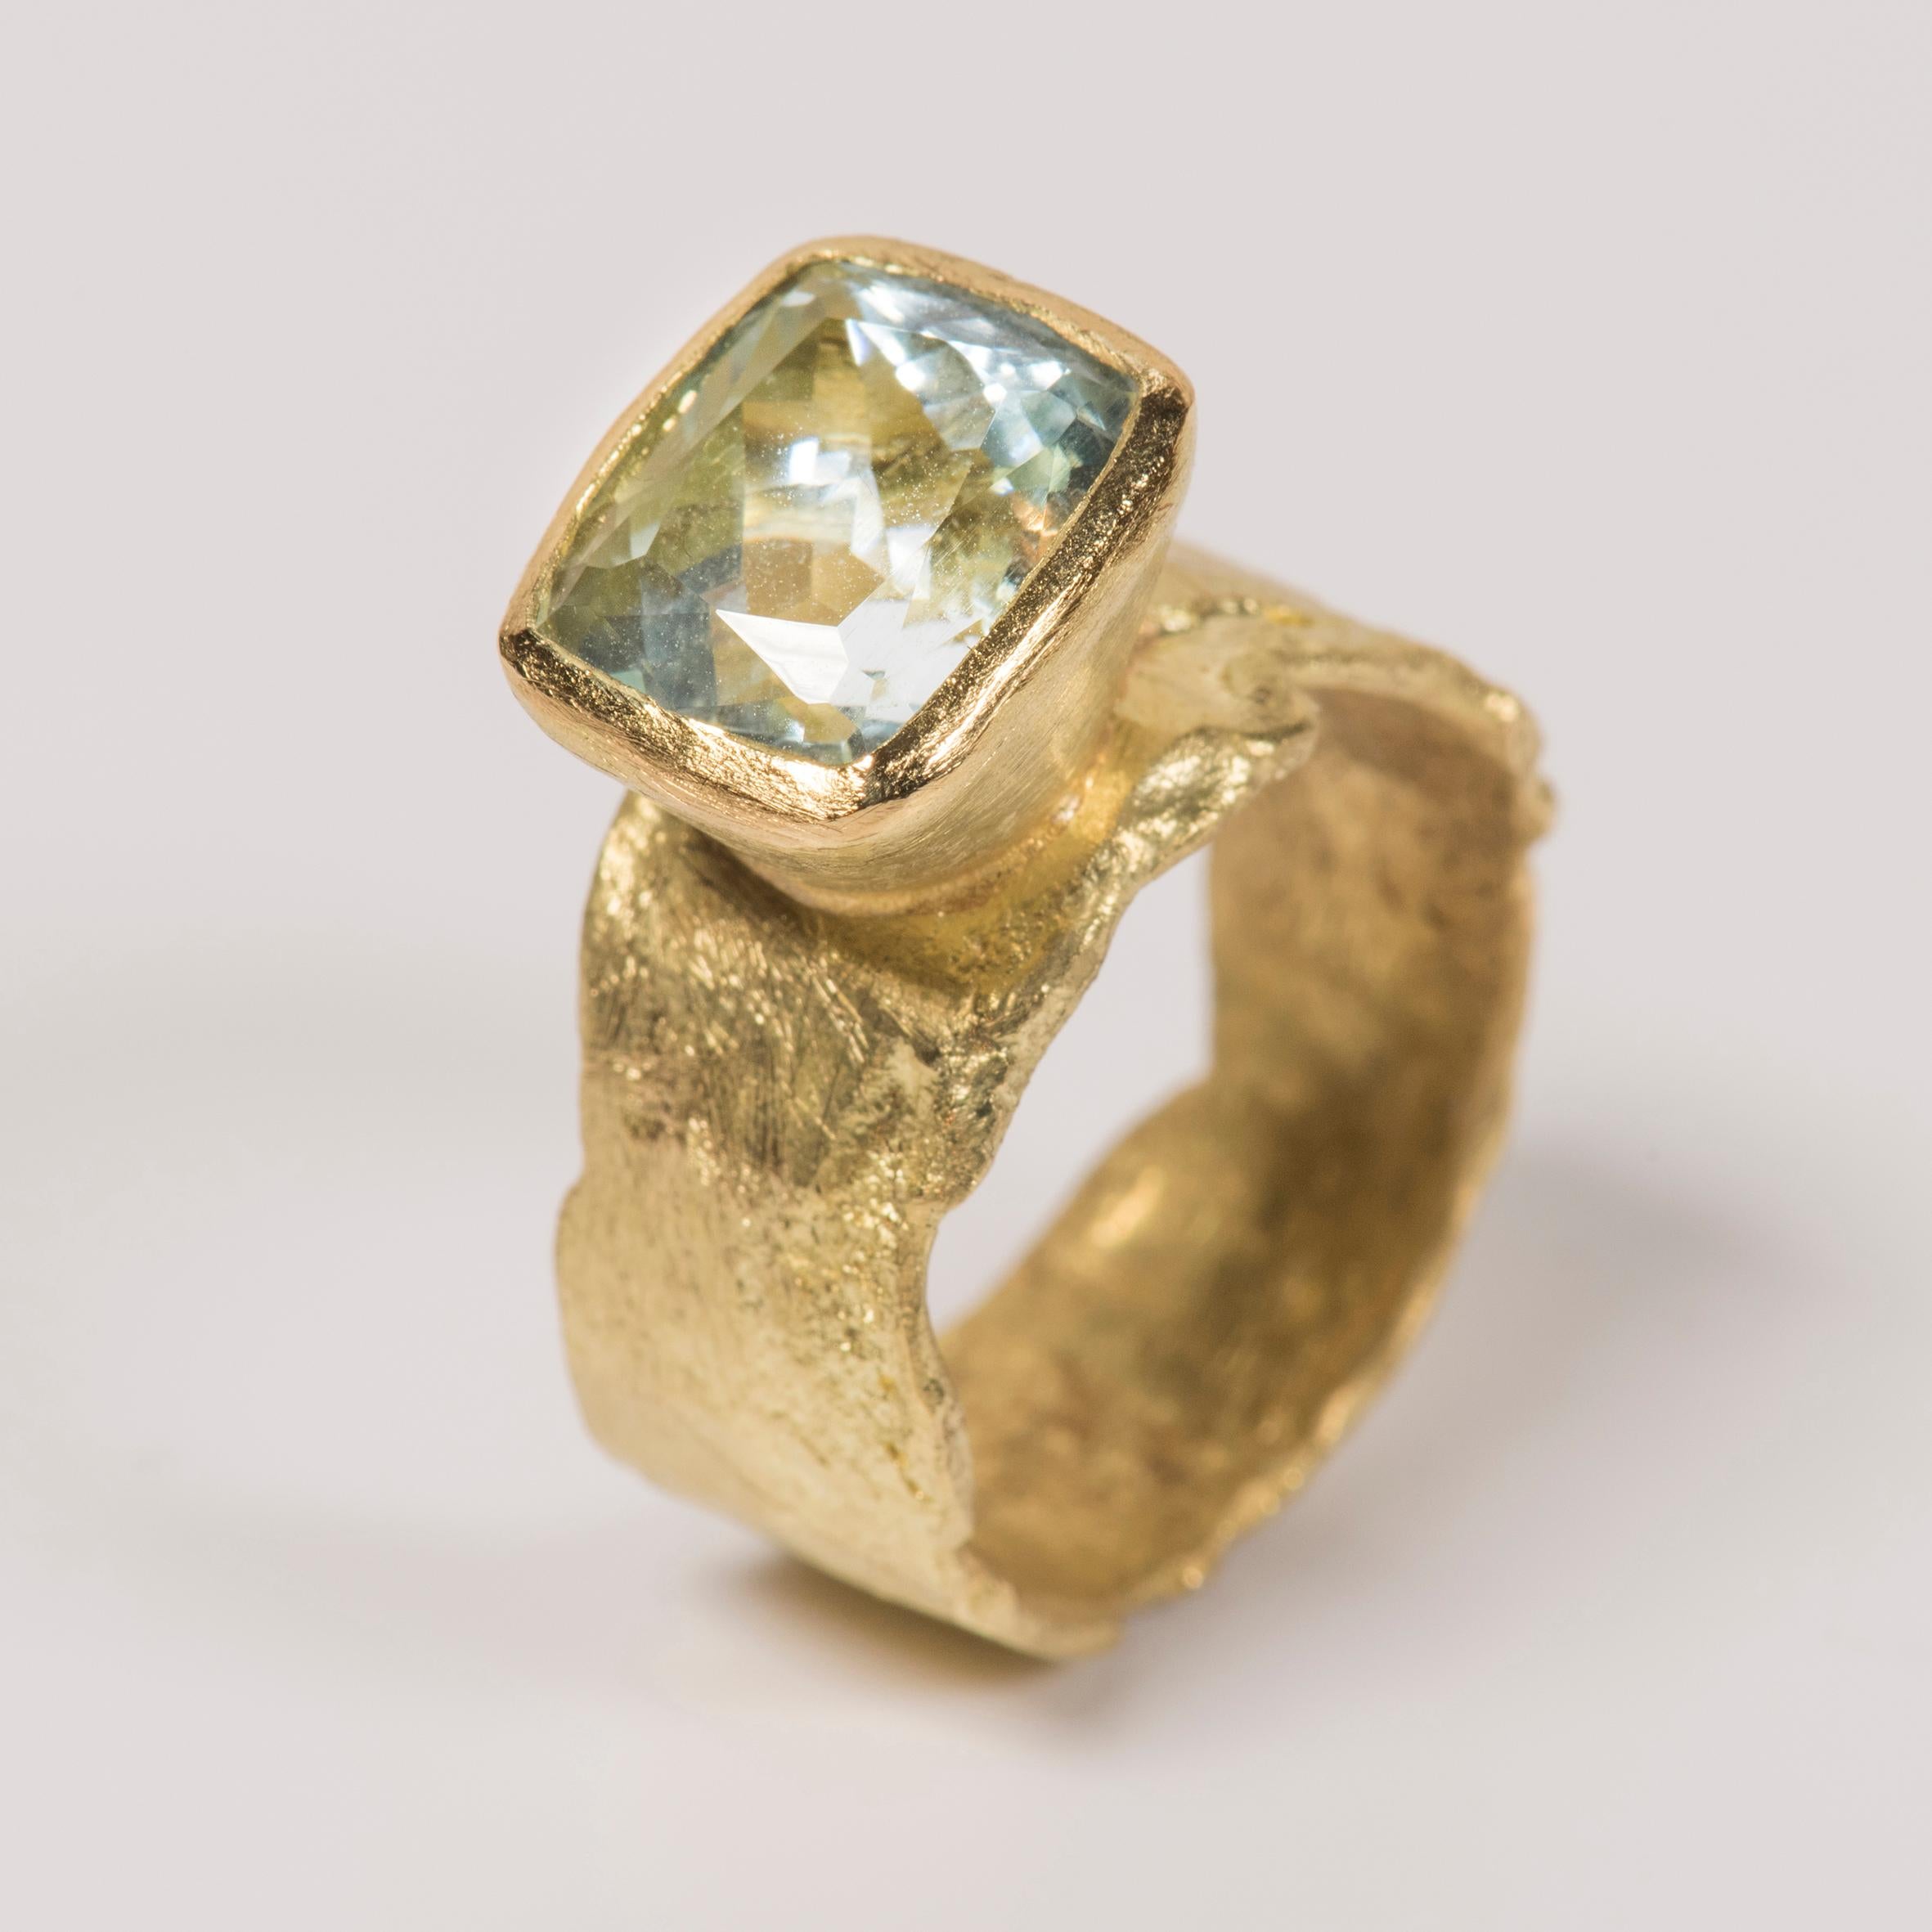 Contemporary Wide Organic Textured Aquamarine Ring Handmade by Disa Allsopp For Sale